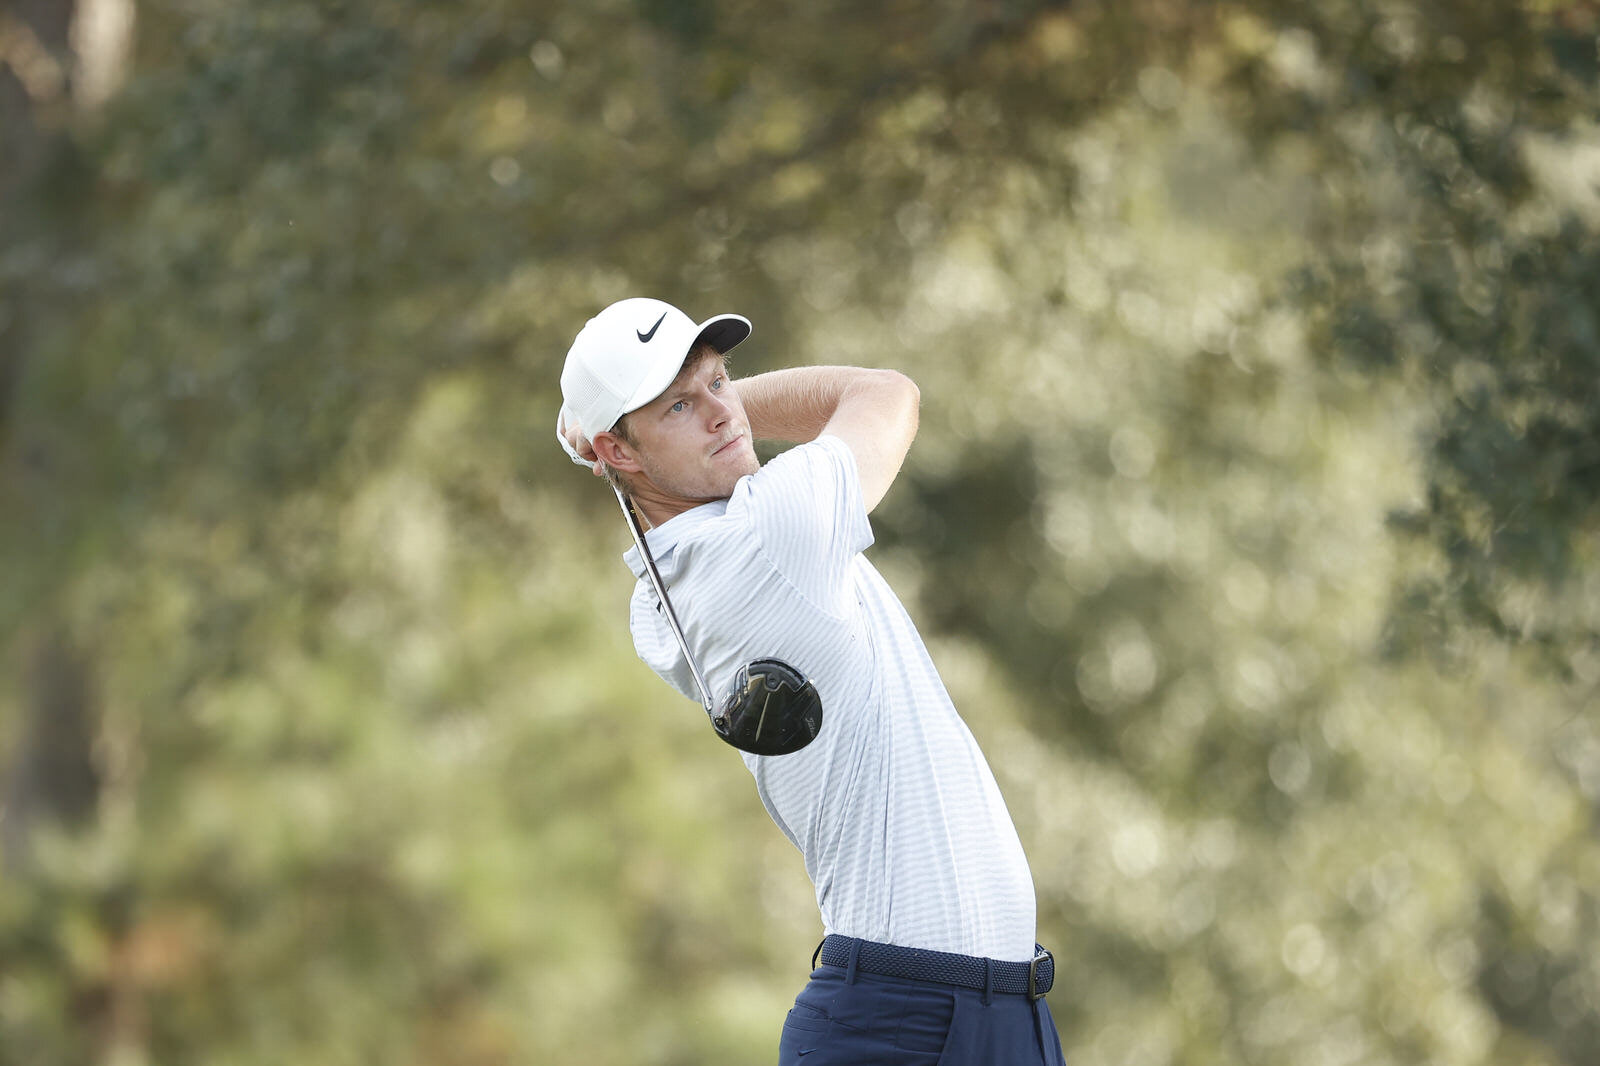  HOUSTON, TEXAS - NOVEMBER 05: Cameron Davis of Australia plays his shot from the first tee during the first round of the Vivint Houston Open at Memorial Park Golf Course on November 05, 2020 in Houston, Texas. (Photo by Maddie Meyer/Getty Images) 